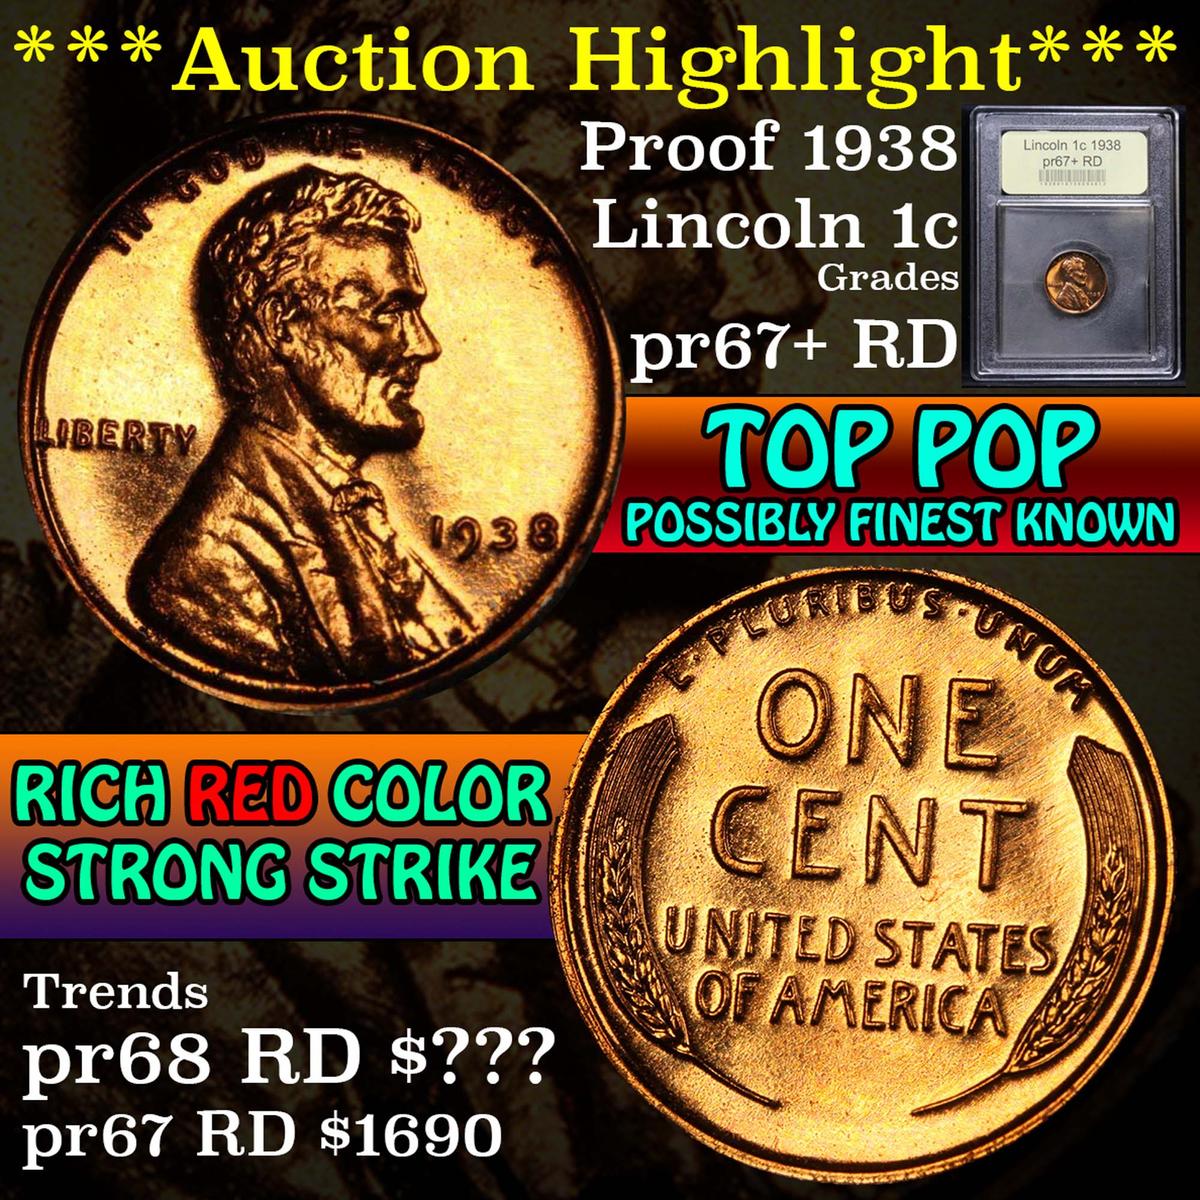 ***Auction Highlight*** Proof 1938 Top Pop Lincoln Cent 1c Graded Gem++ Proof RD by USCG (fc)